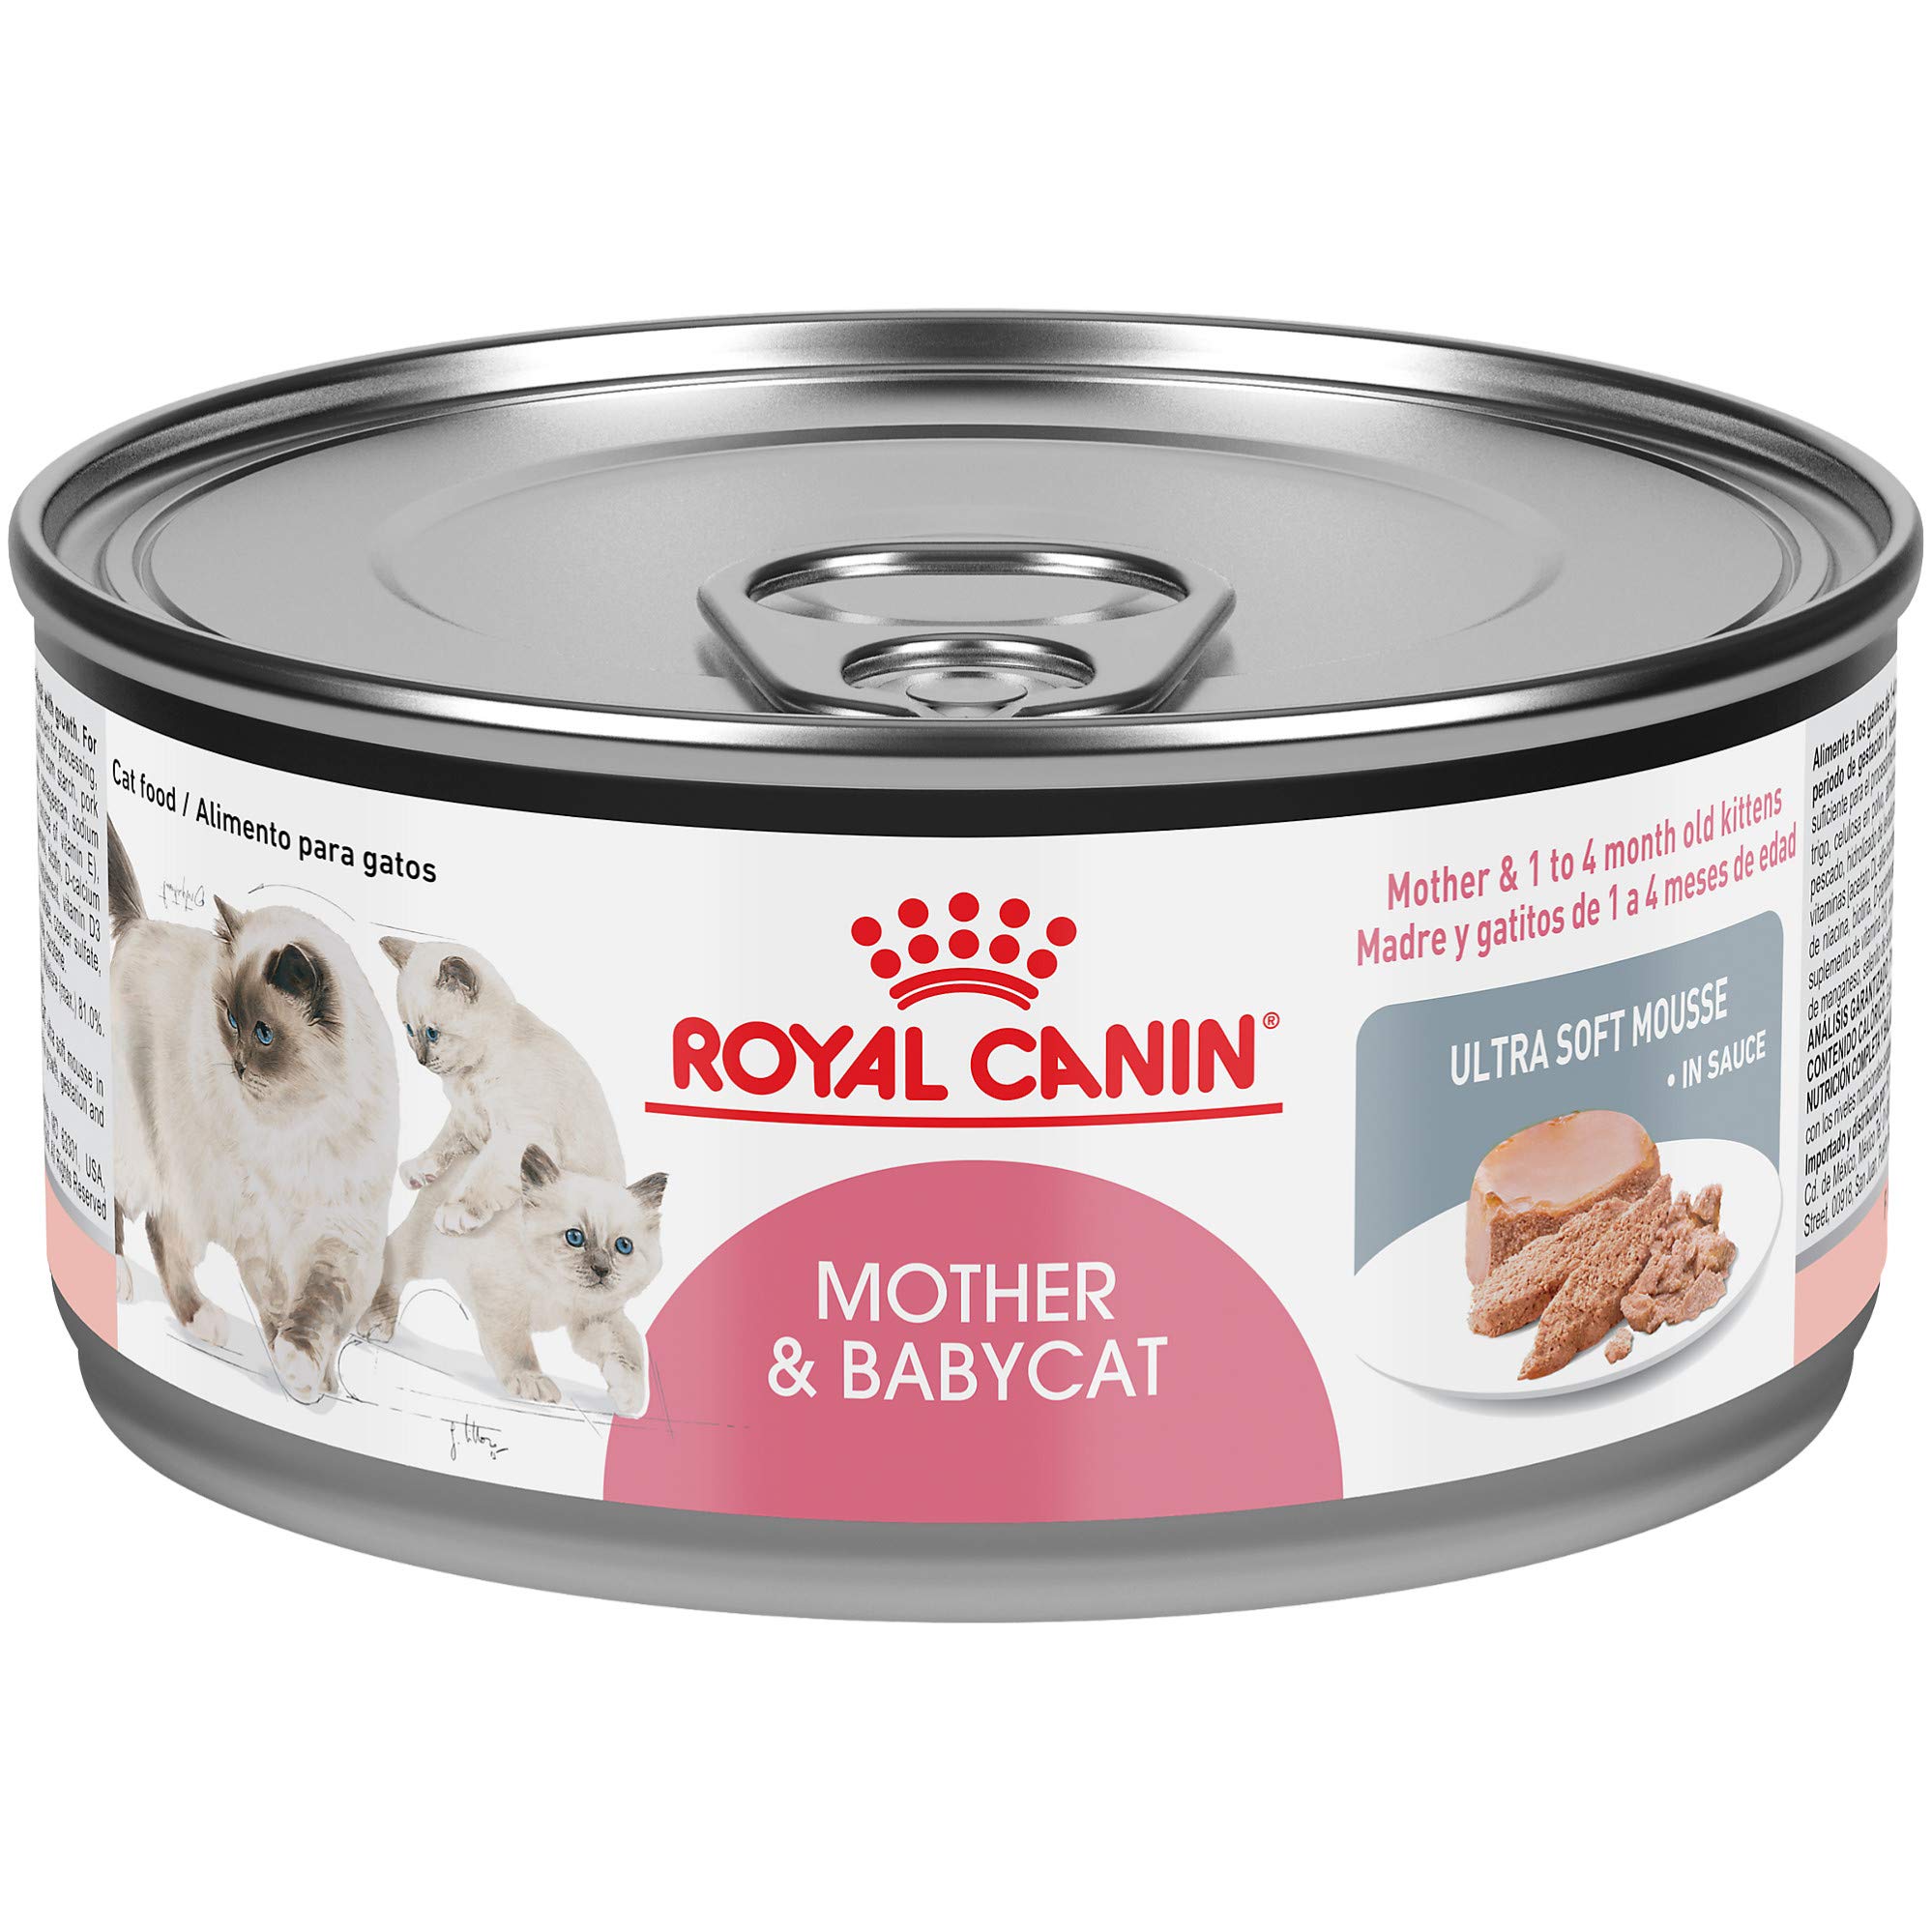 Book Cover Royal Canin Feline Health Nutrition Mother & Babycat Ultra Soft Mousse in Sauce Canned Cat Food, 5.8 oz can